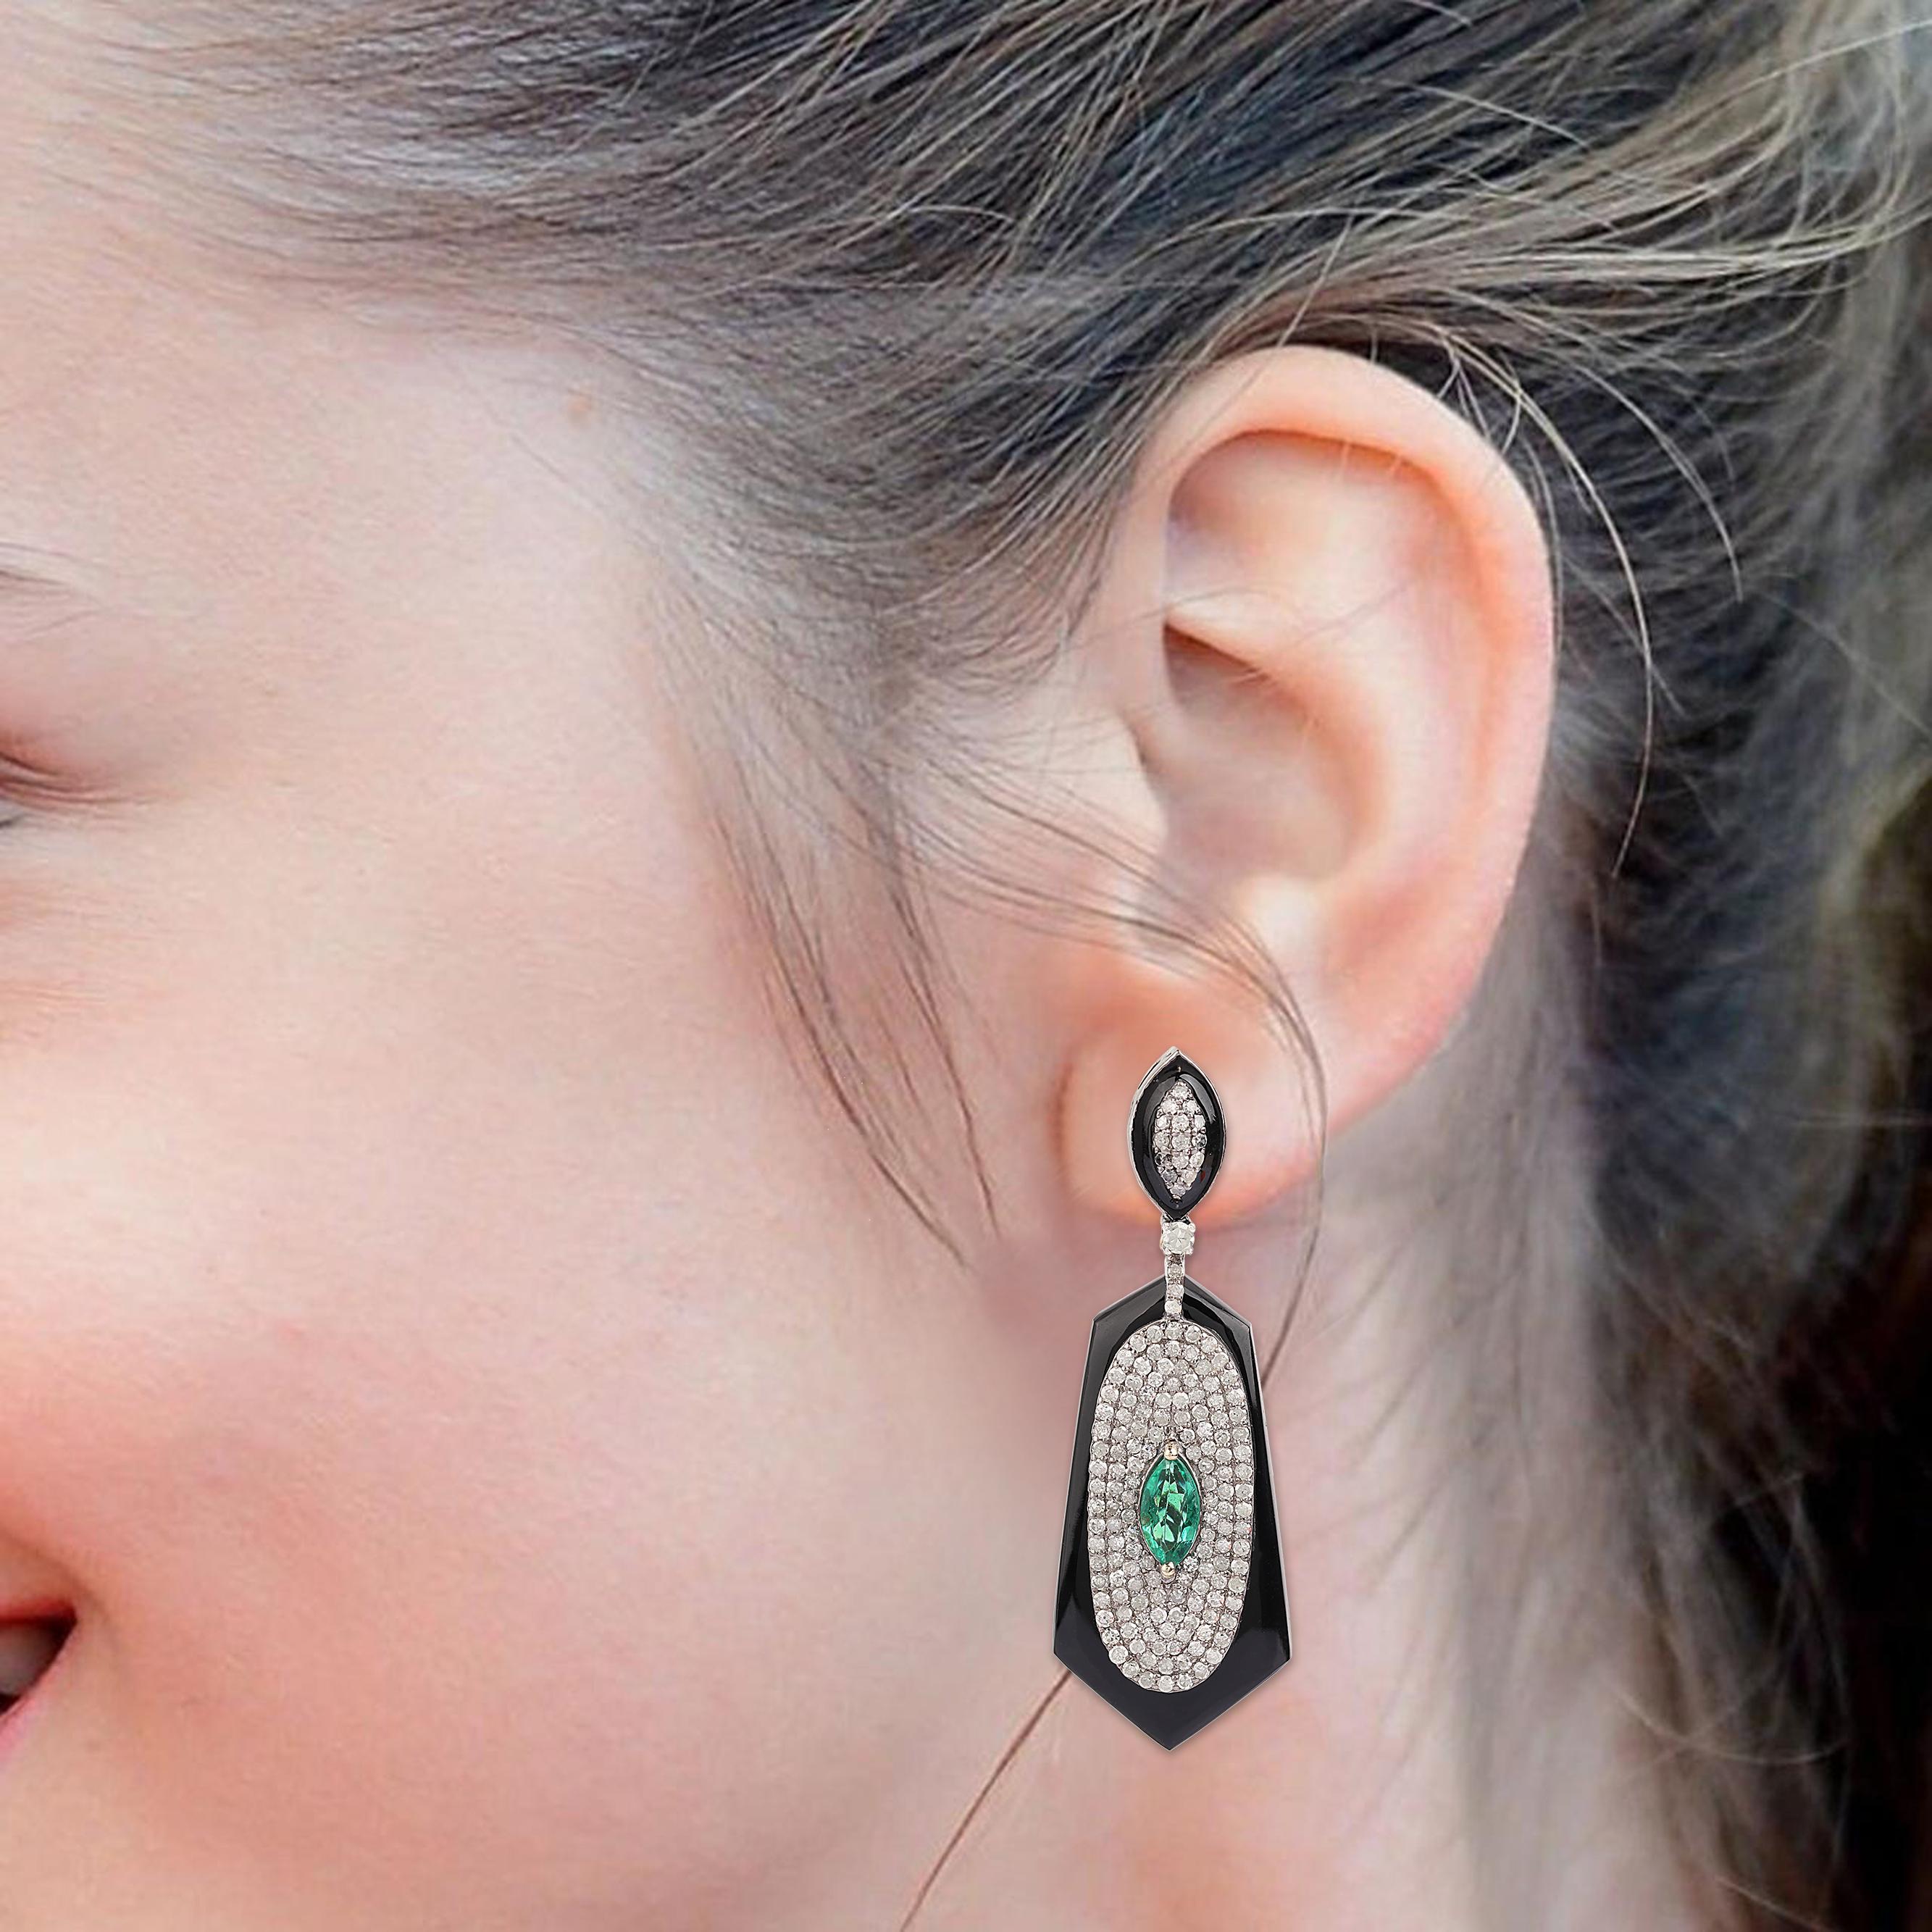 13.80 Carats Diamond, Emerald, and Black Onyx Drop Earrings in Contemporary Style

Breathtaking design and amazing combination of black onyx, diamonds and emerald is what makes this pair of earrings a style statement. This set of earrings is